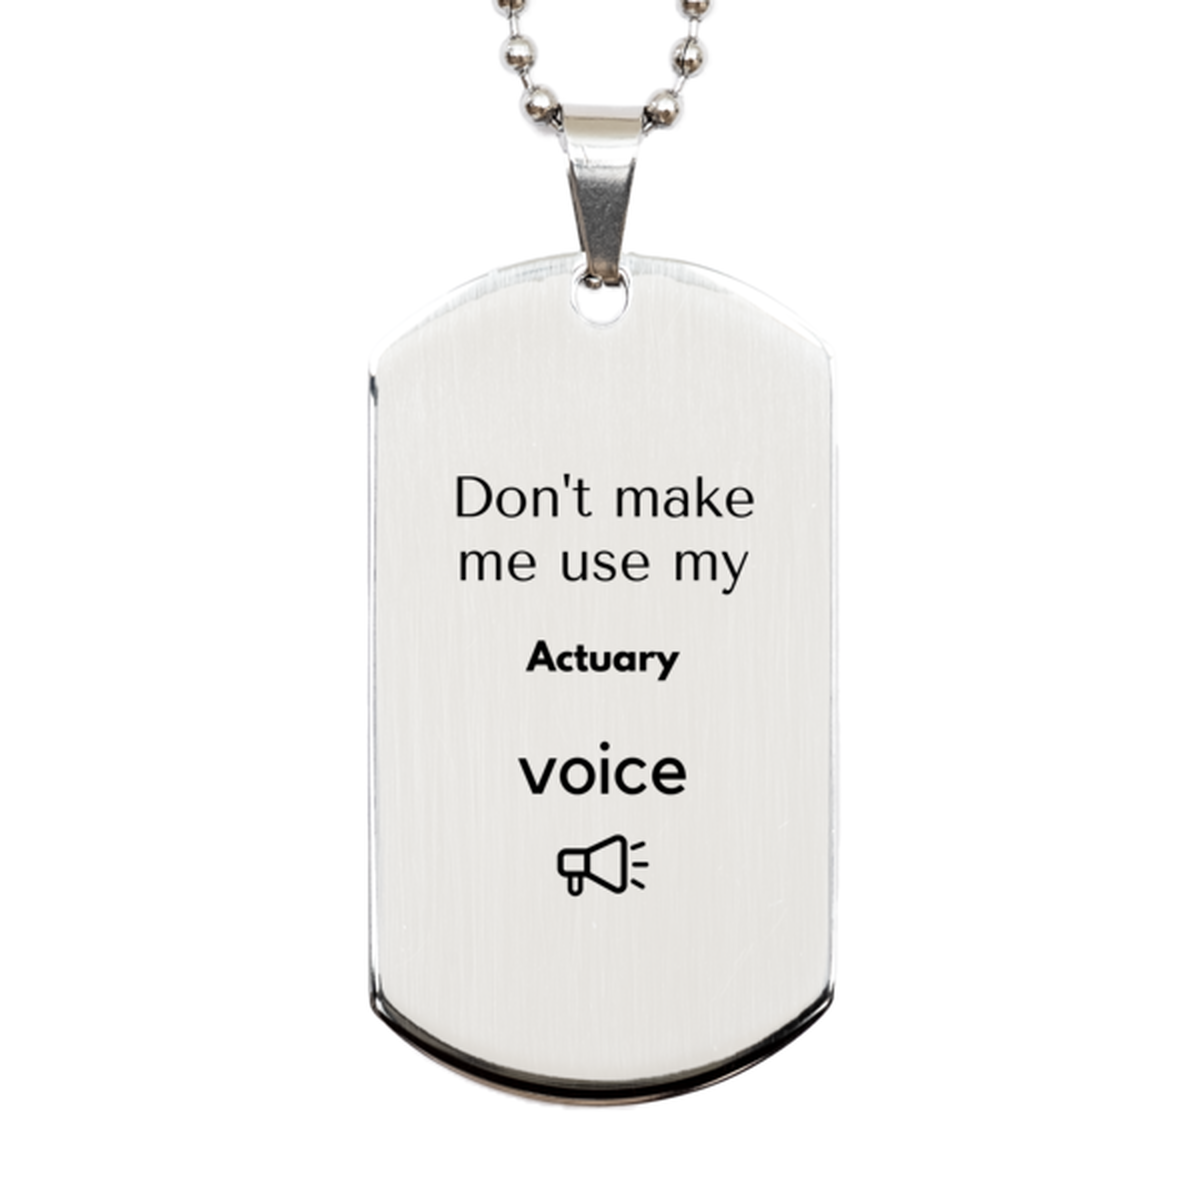 Don't make me use my Actuary voice, Sarcasm Actuary Gifts, Christmas Actuary Silver Dog Tag Birthday Unique Gifts For Actuary Coworkers, Men, Women, Colleague, Friends